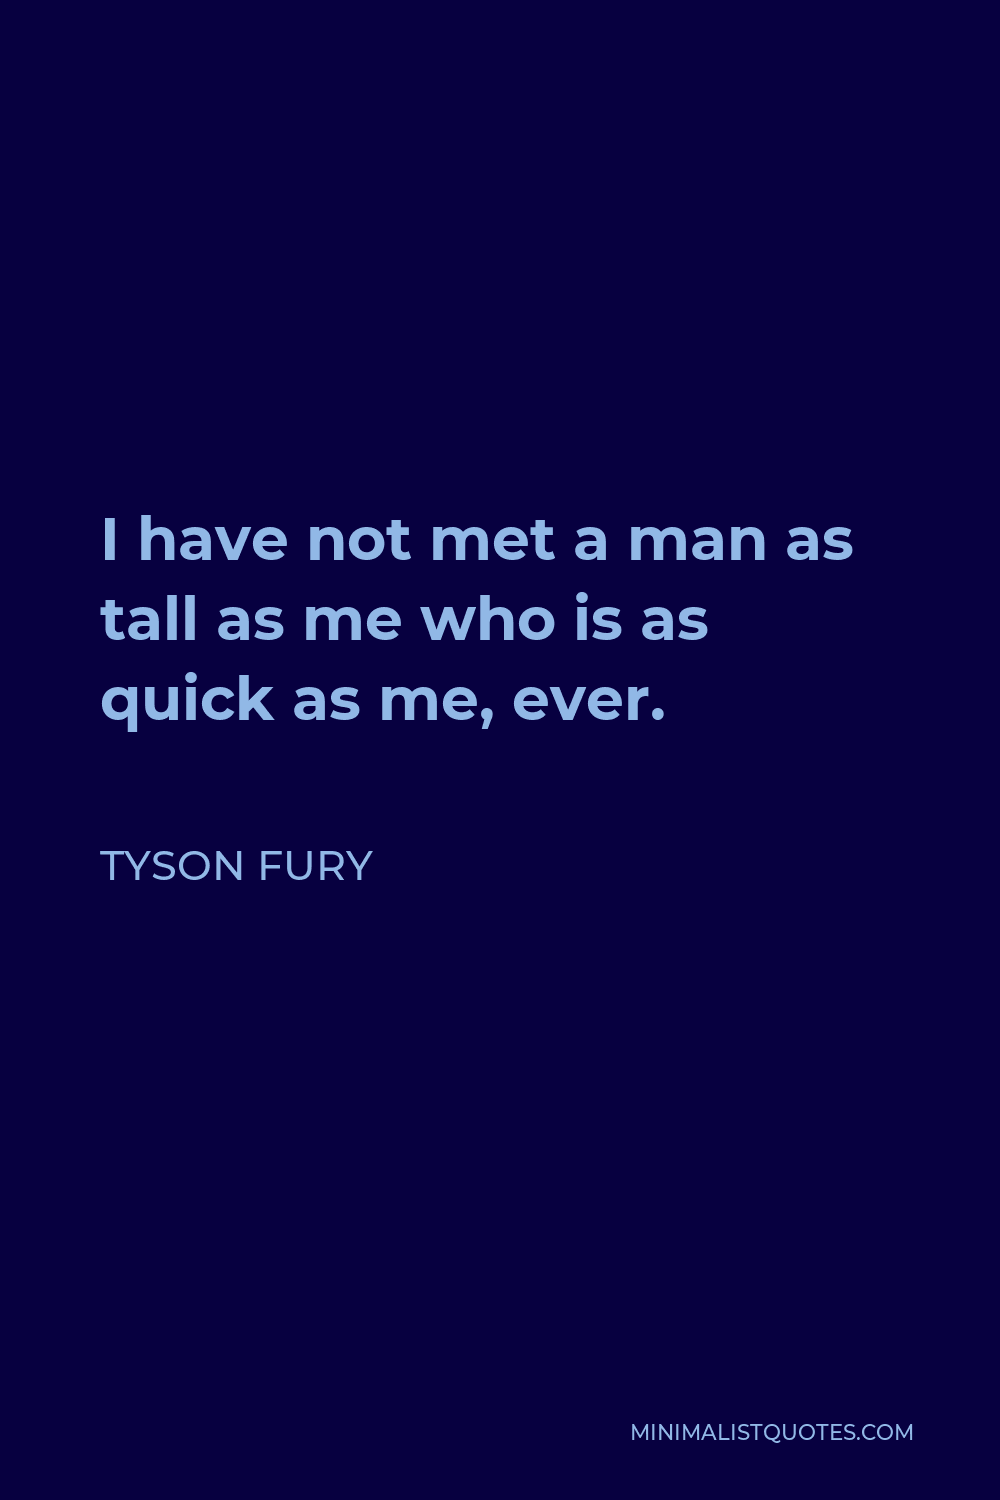 Tyson Fury Quote - I have not met a man as tall as me who is as quick as me, ever.